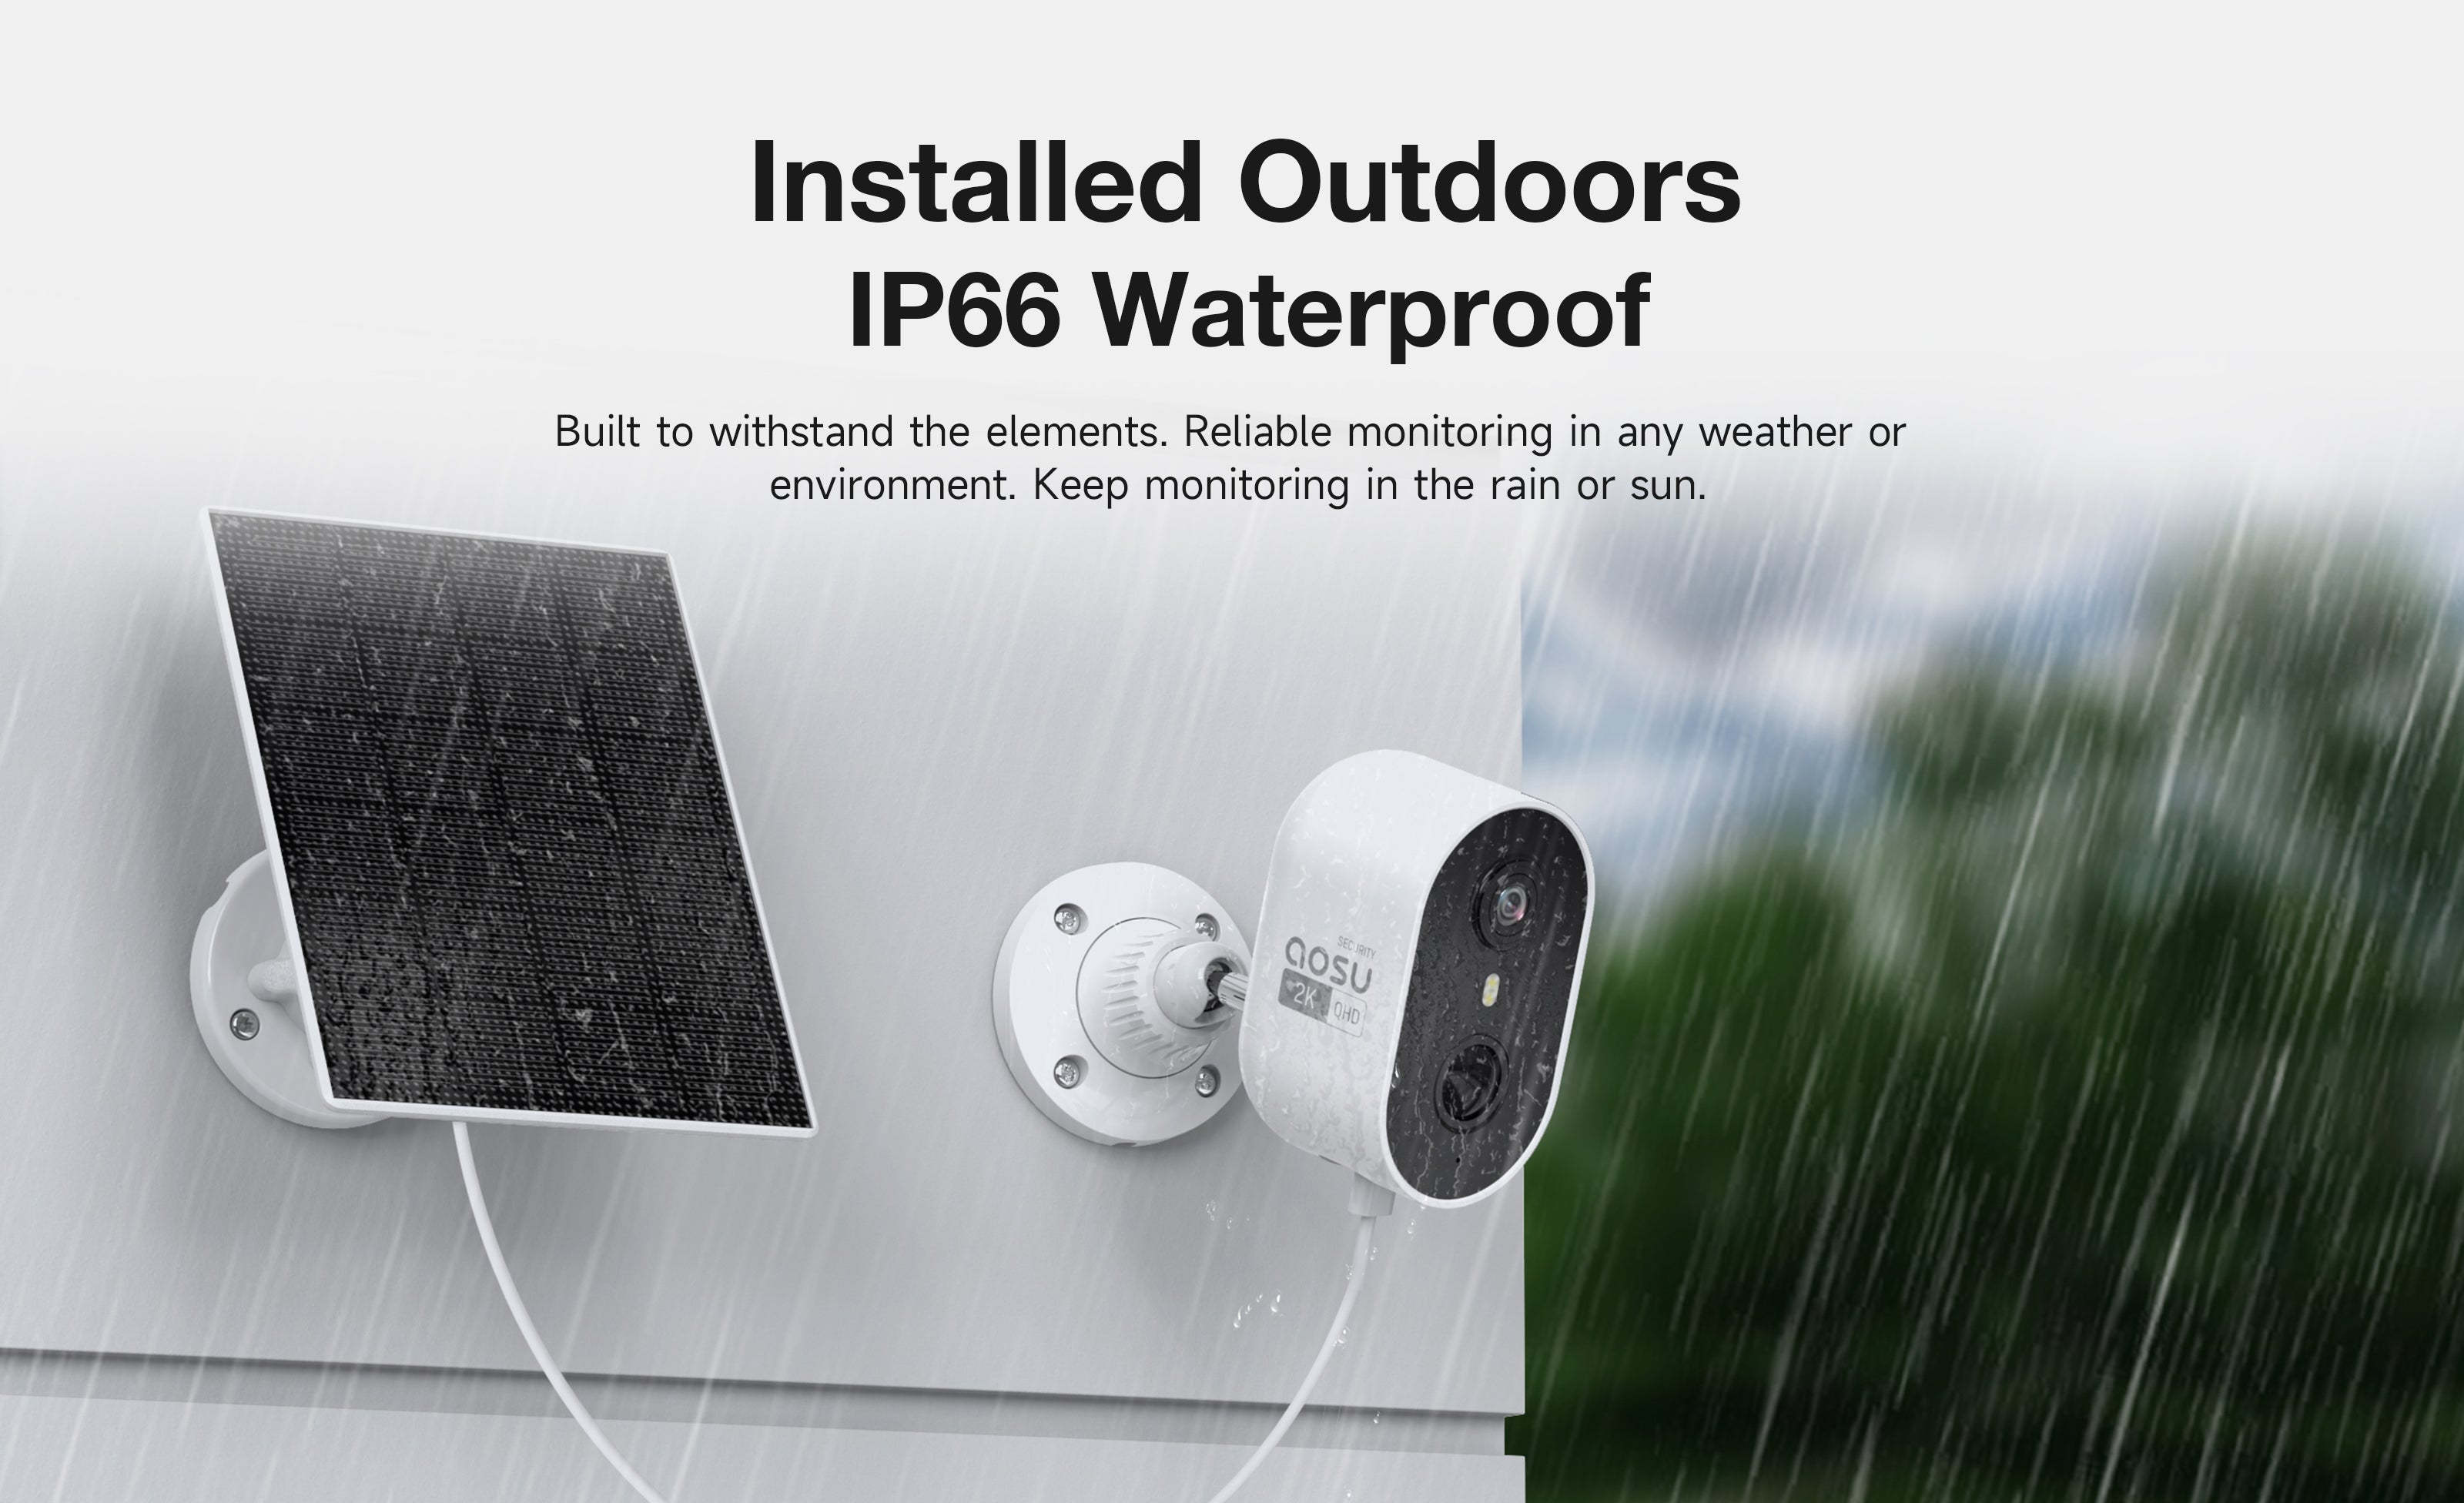 security camera for outdoor use, features IP66 waterproof